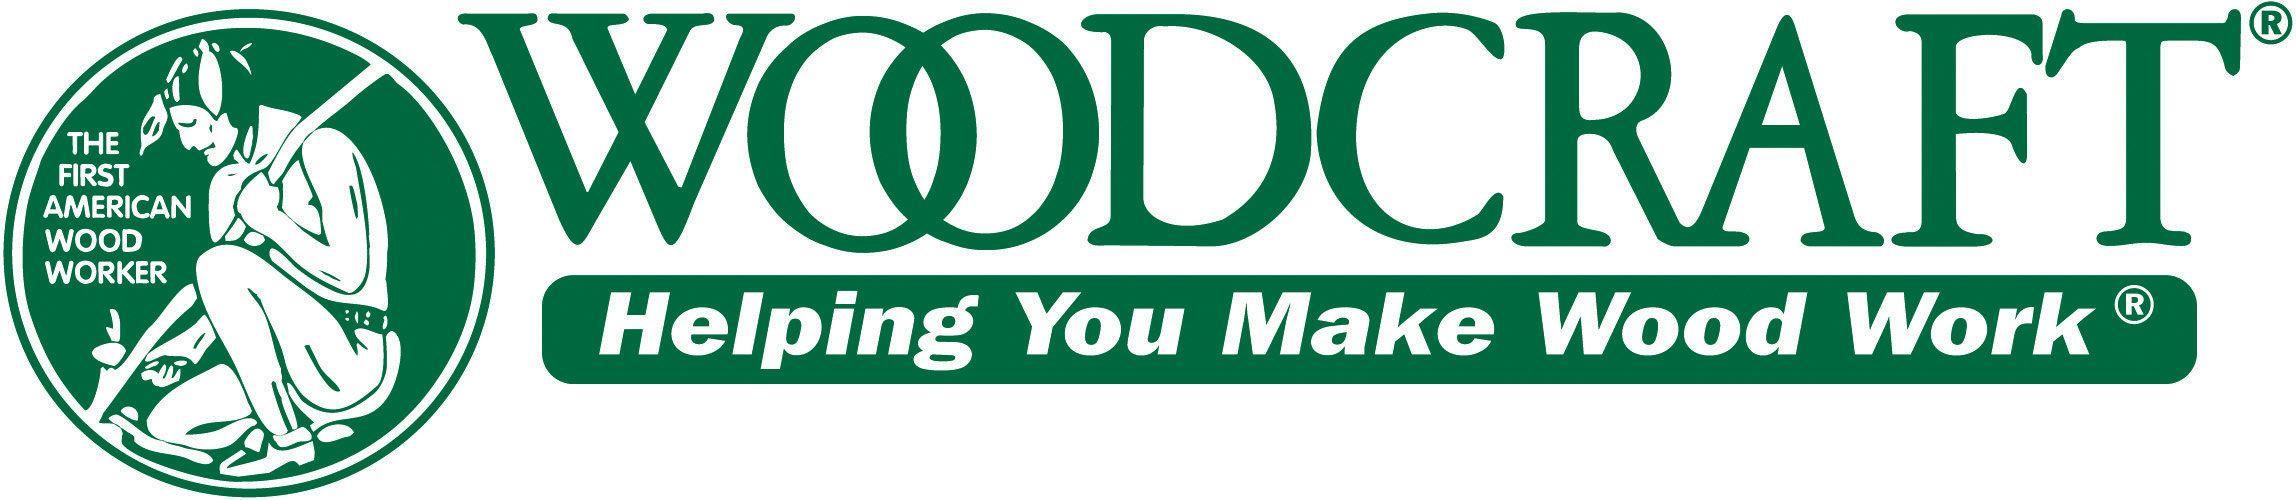 Woodcraft Logo - The First American Woodworker